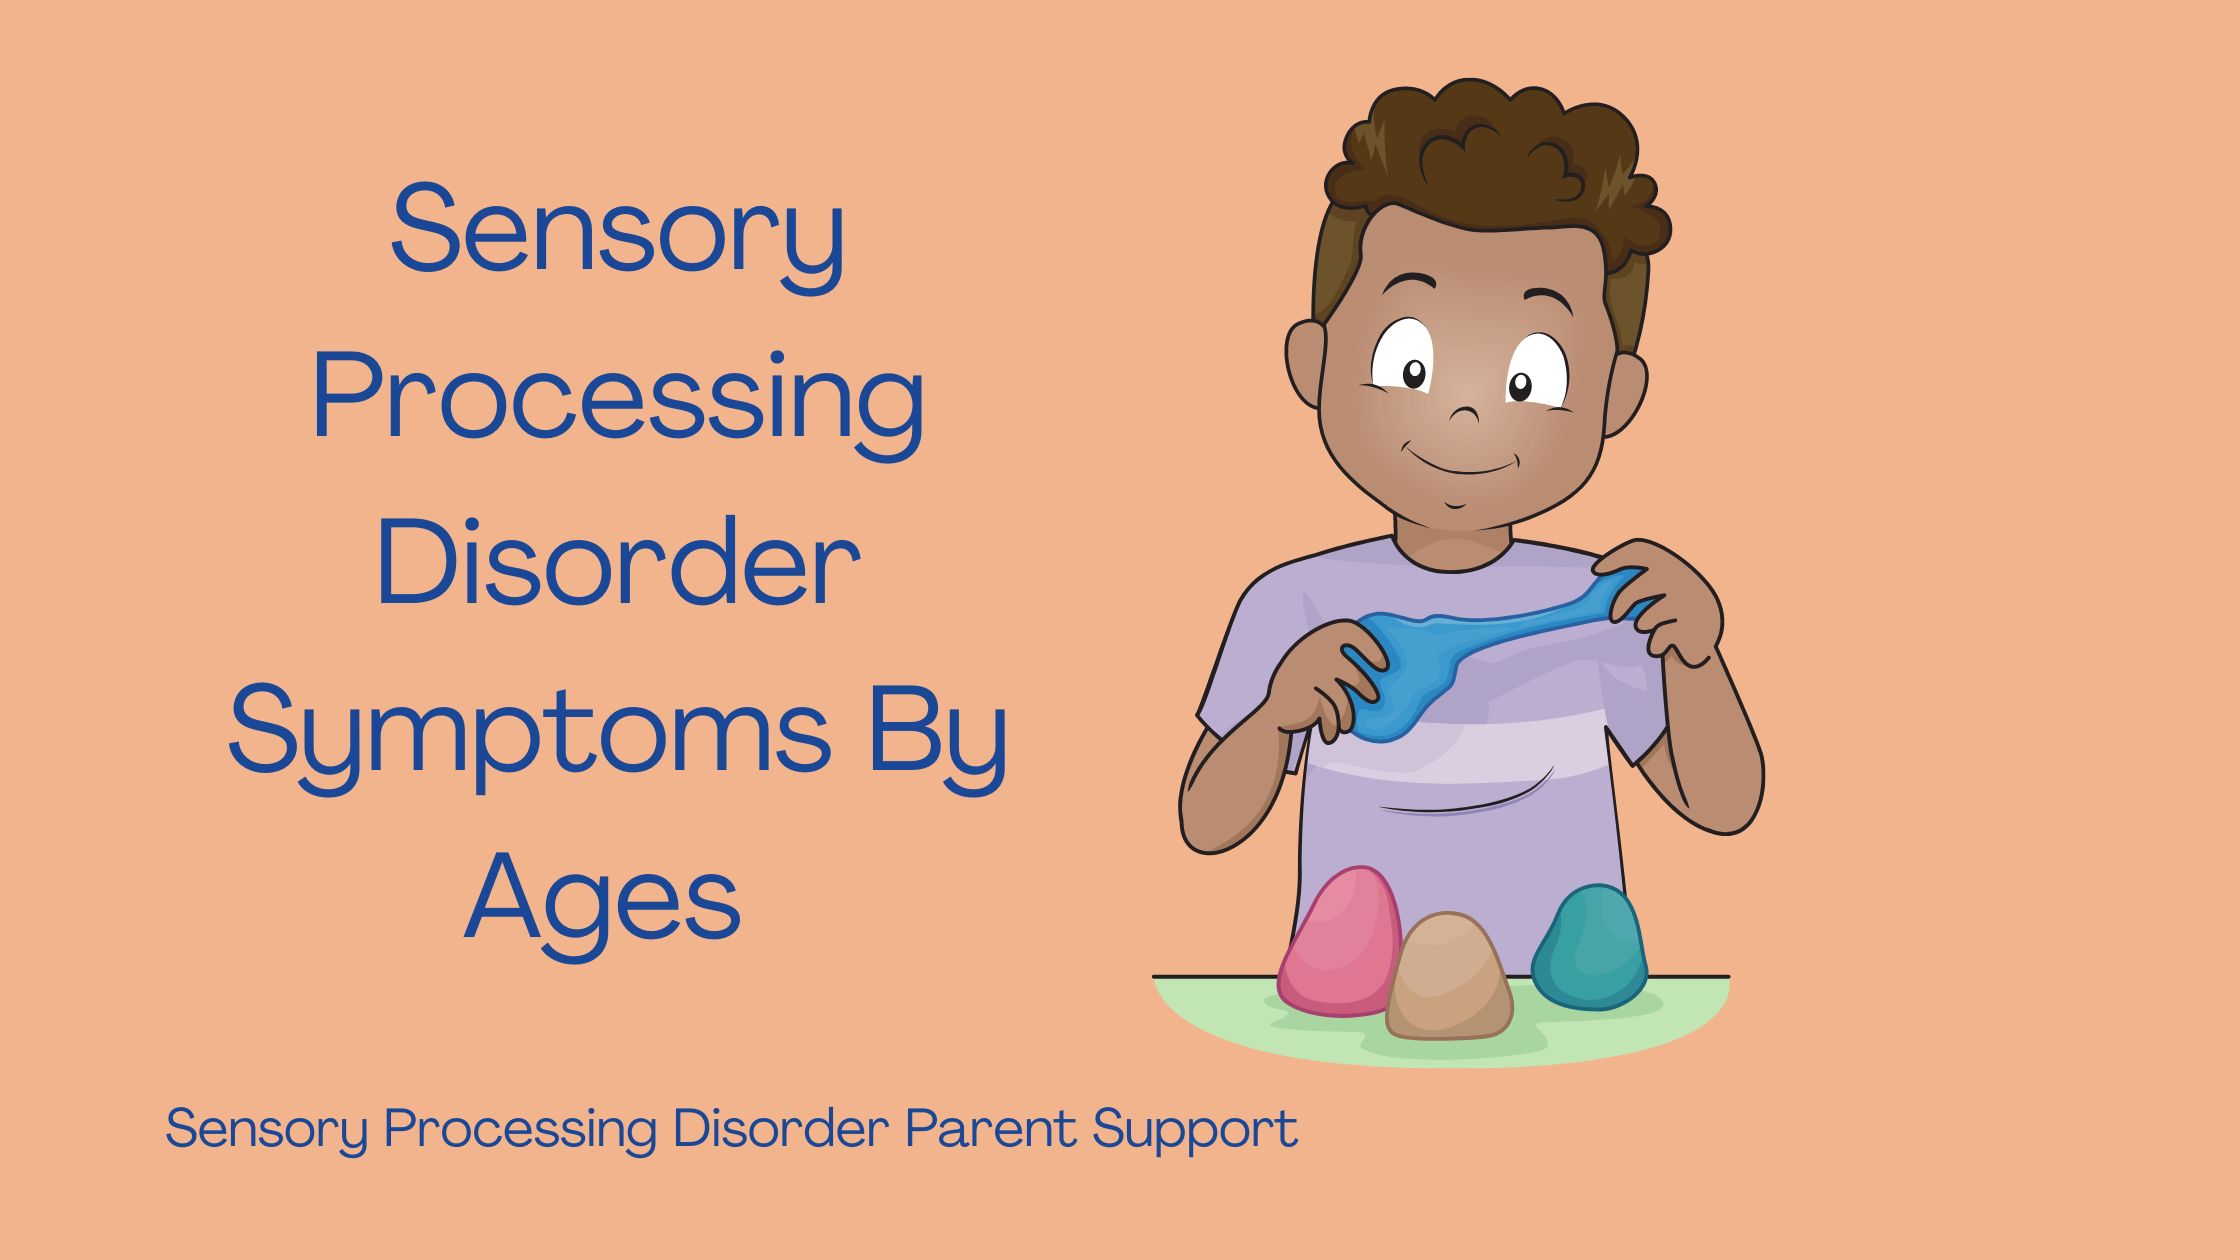 child with sensory processing disorder playing with sensory play dough Sensory Processing Disorder Symptoms By Ages